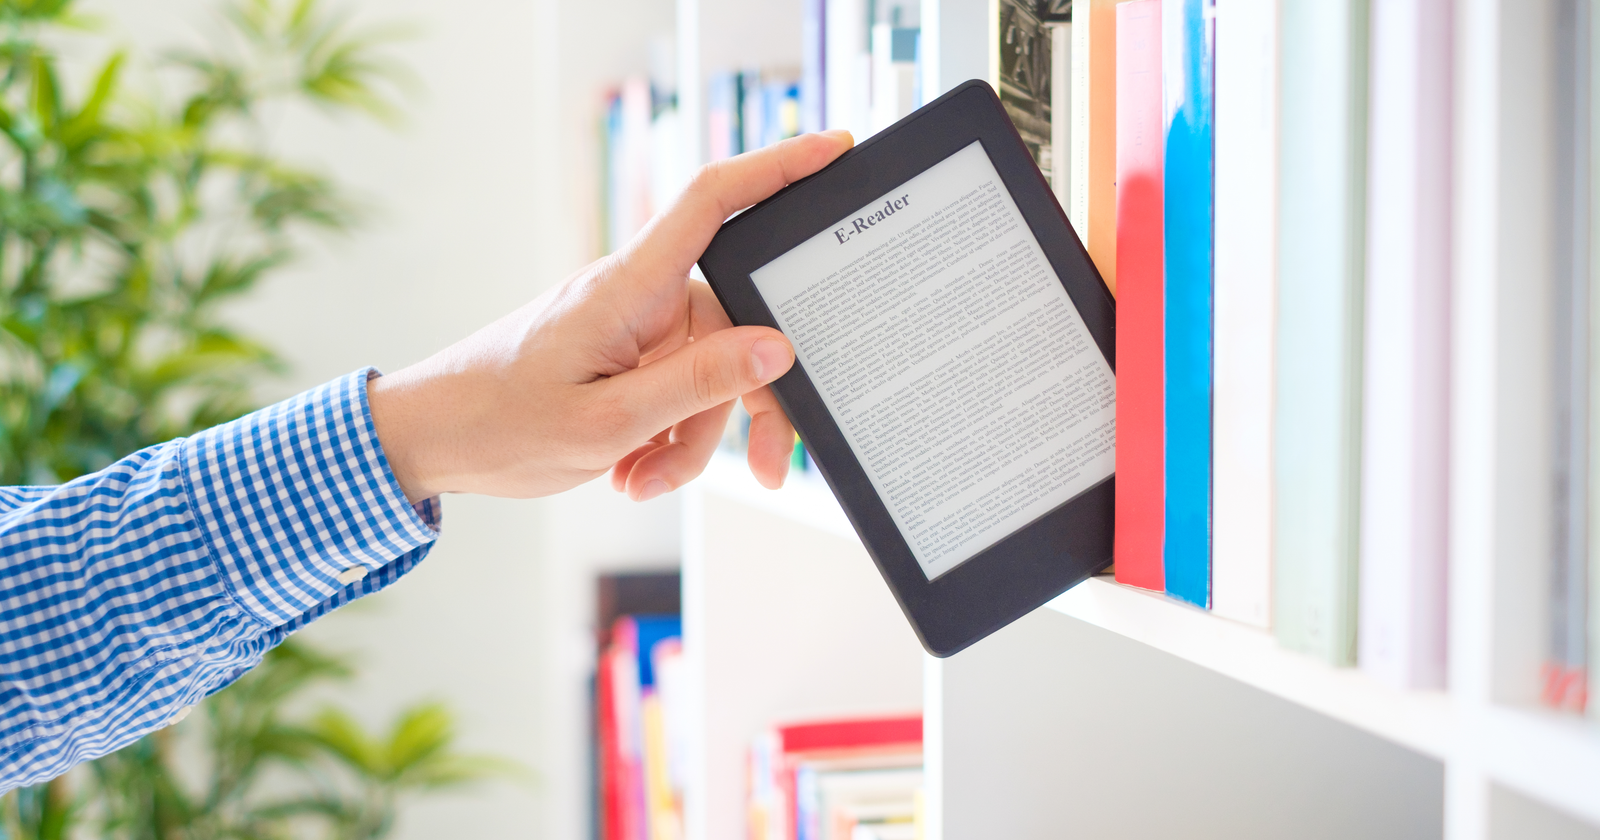 What is an eBook? How should marketers use it? - Articles - MagNet